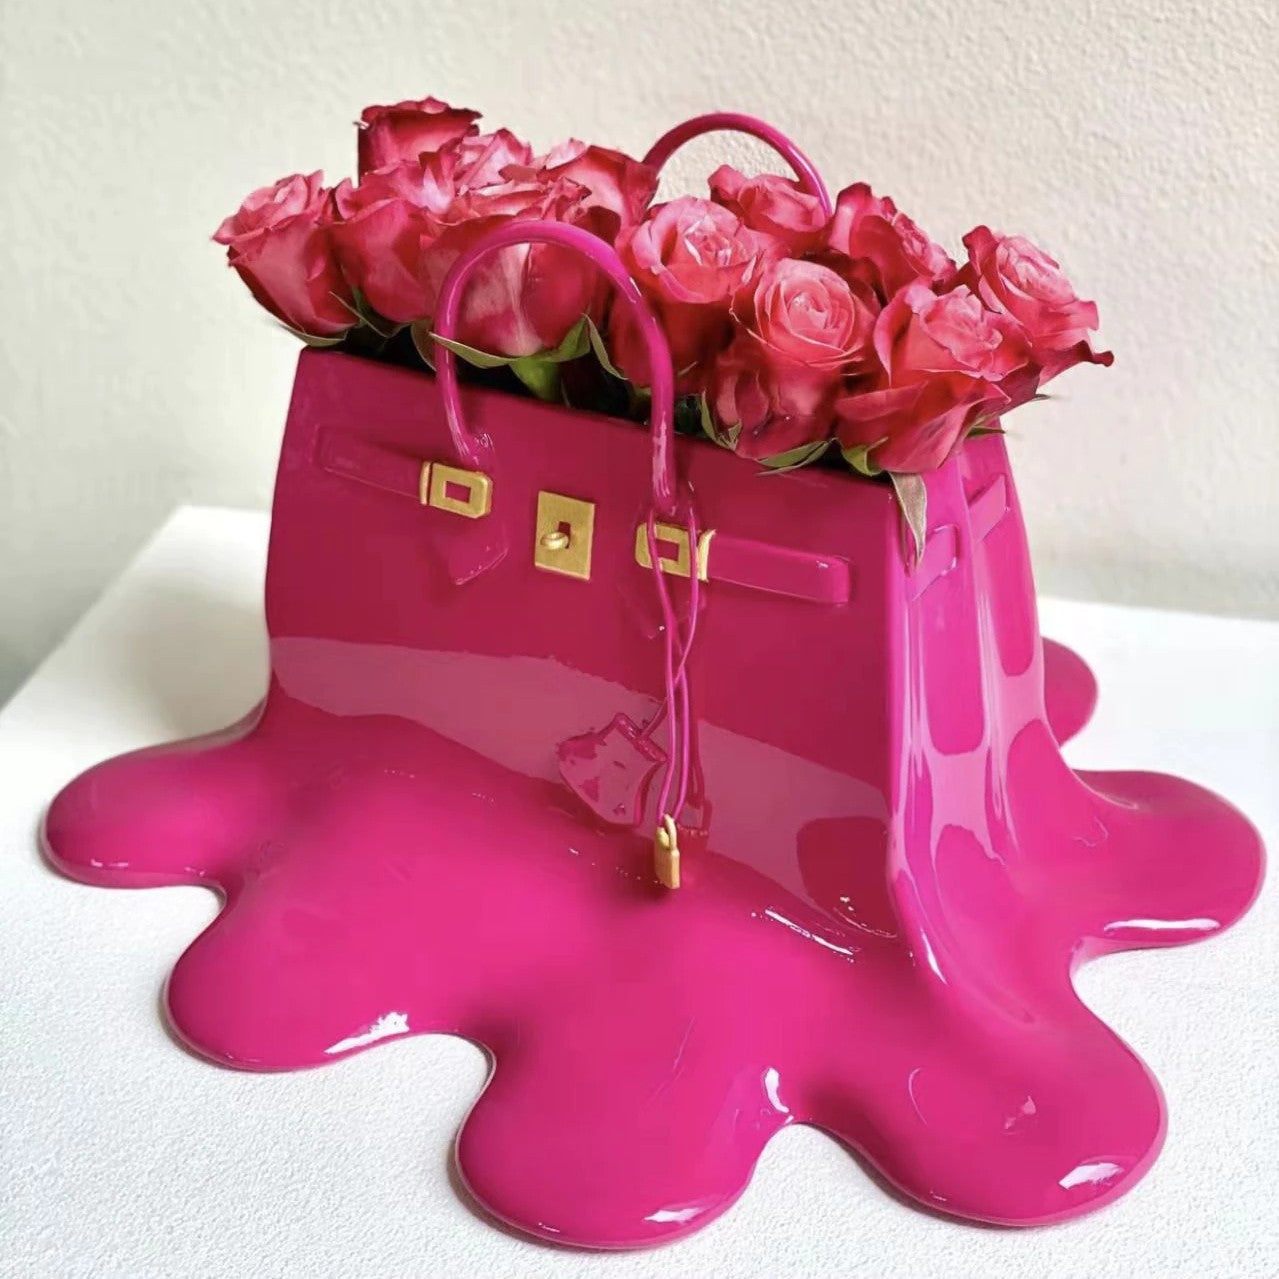 A pink resin vase which looks like a melting designer women’s handbag. The vase is filled with a pretty bunch of pink roses